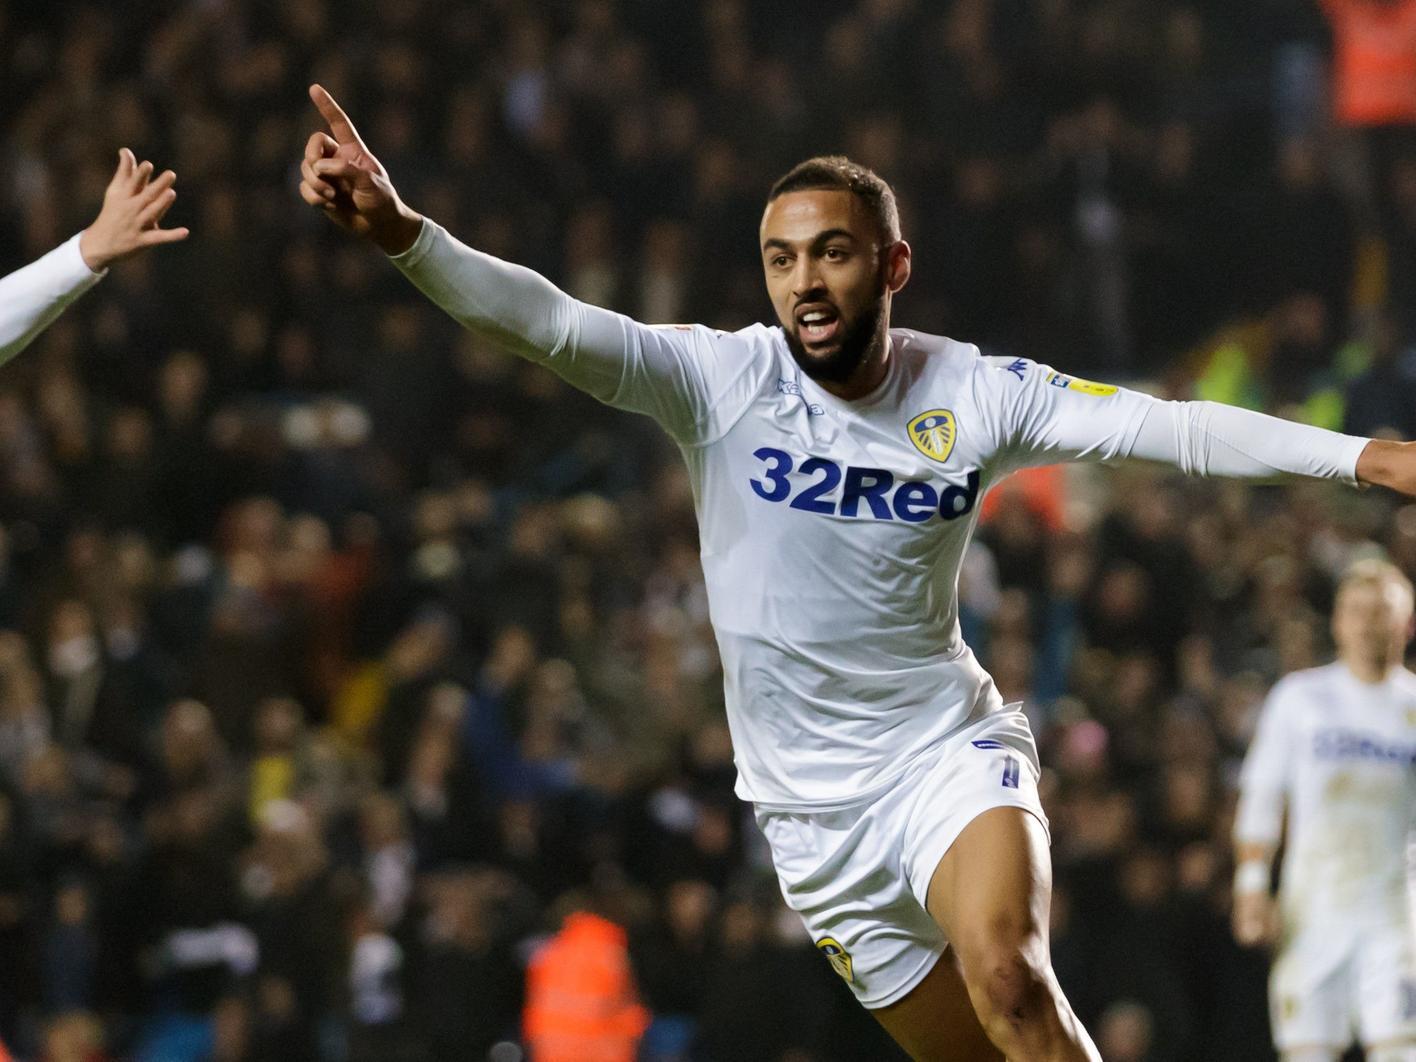 "That is why nothing compares to football" said Marcelo Bielsa after seeing Kemar Roofe score twice in stoppage time to earn Leeds the win. He's not wrong.